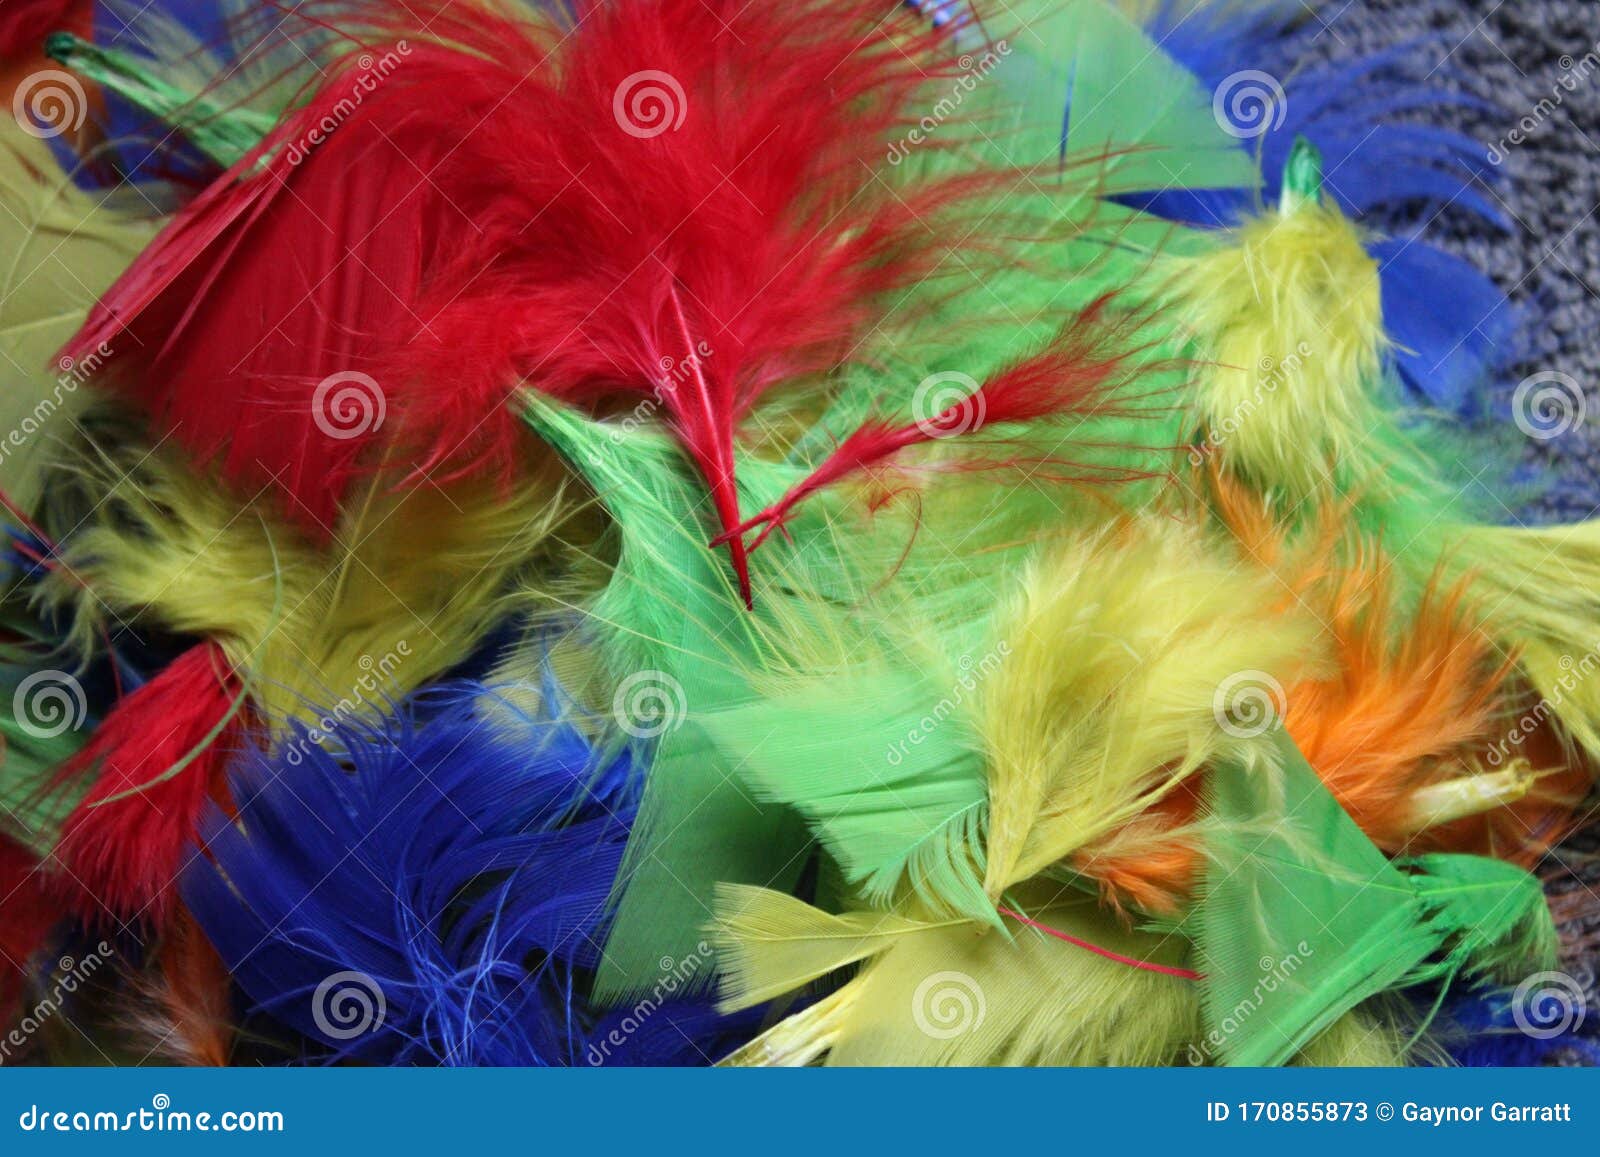 A Selection of Coloured Feathers Stock Image - Image of feathery ...